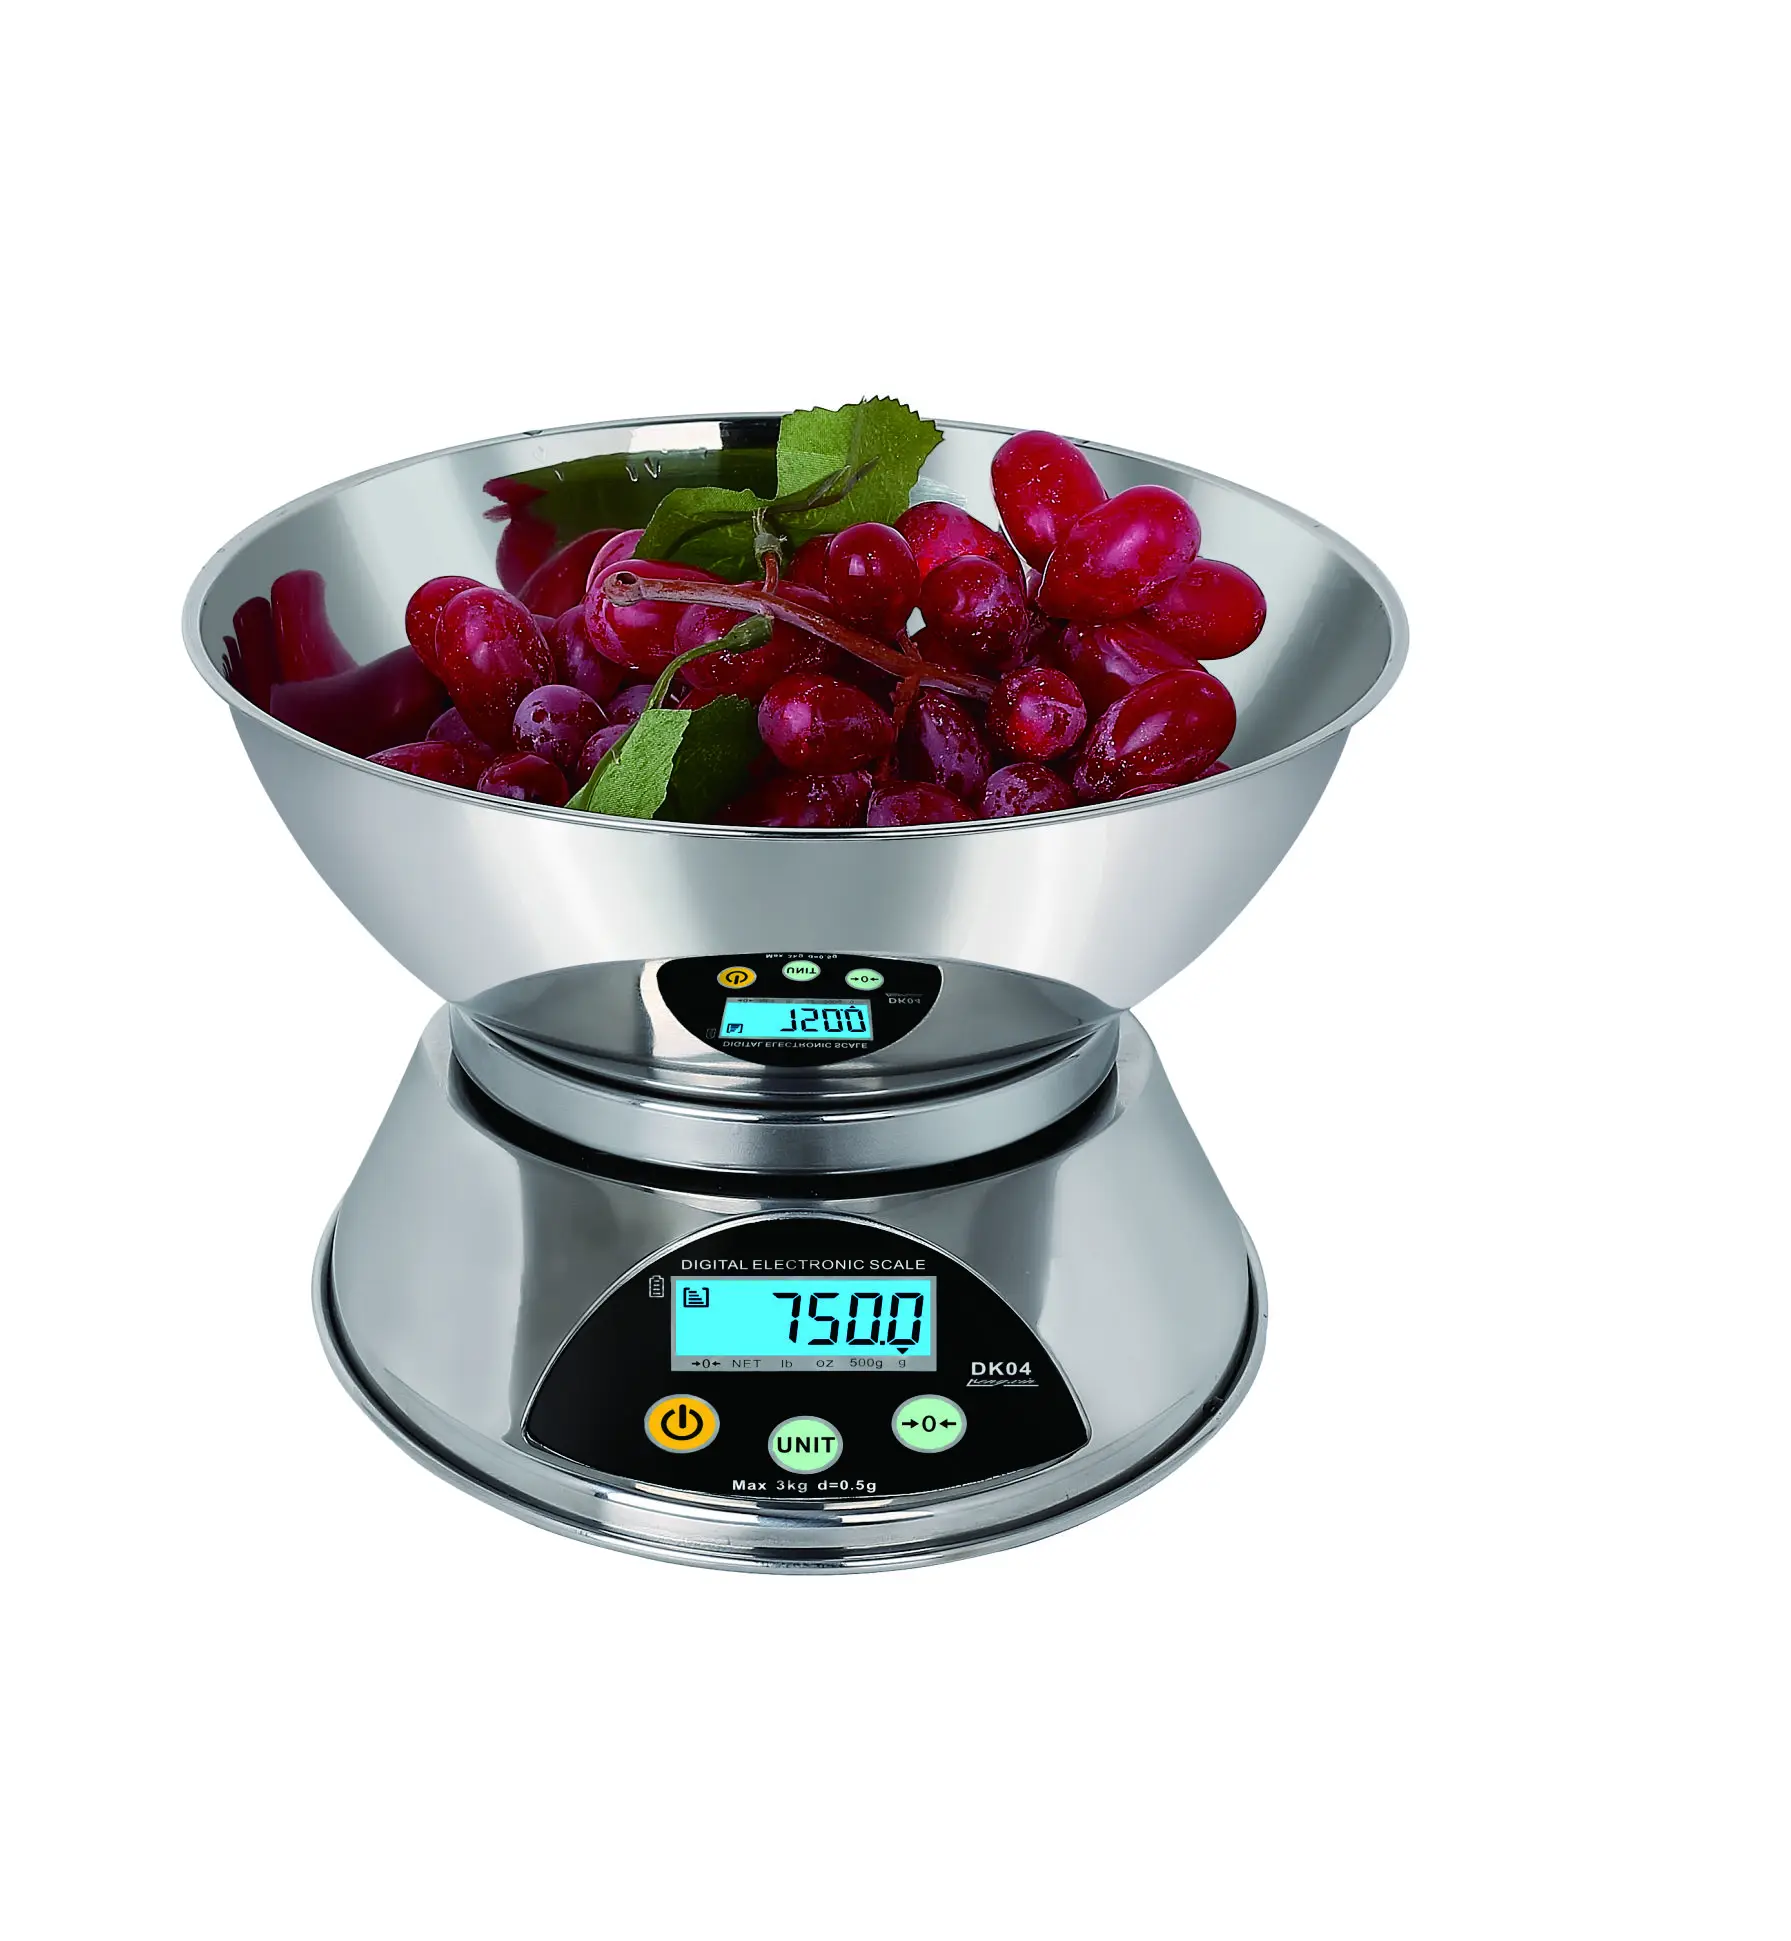 

Digital Complete stainless Kitchen Scale1Kg 0.1g 3Kg 0.5g 6Kg 1g Food Scales Digital Weight Gram and Oz Scale with LCD/ Tare